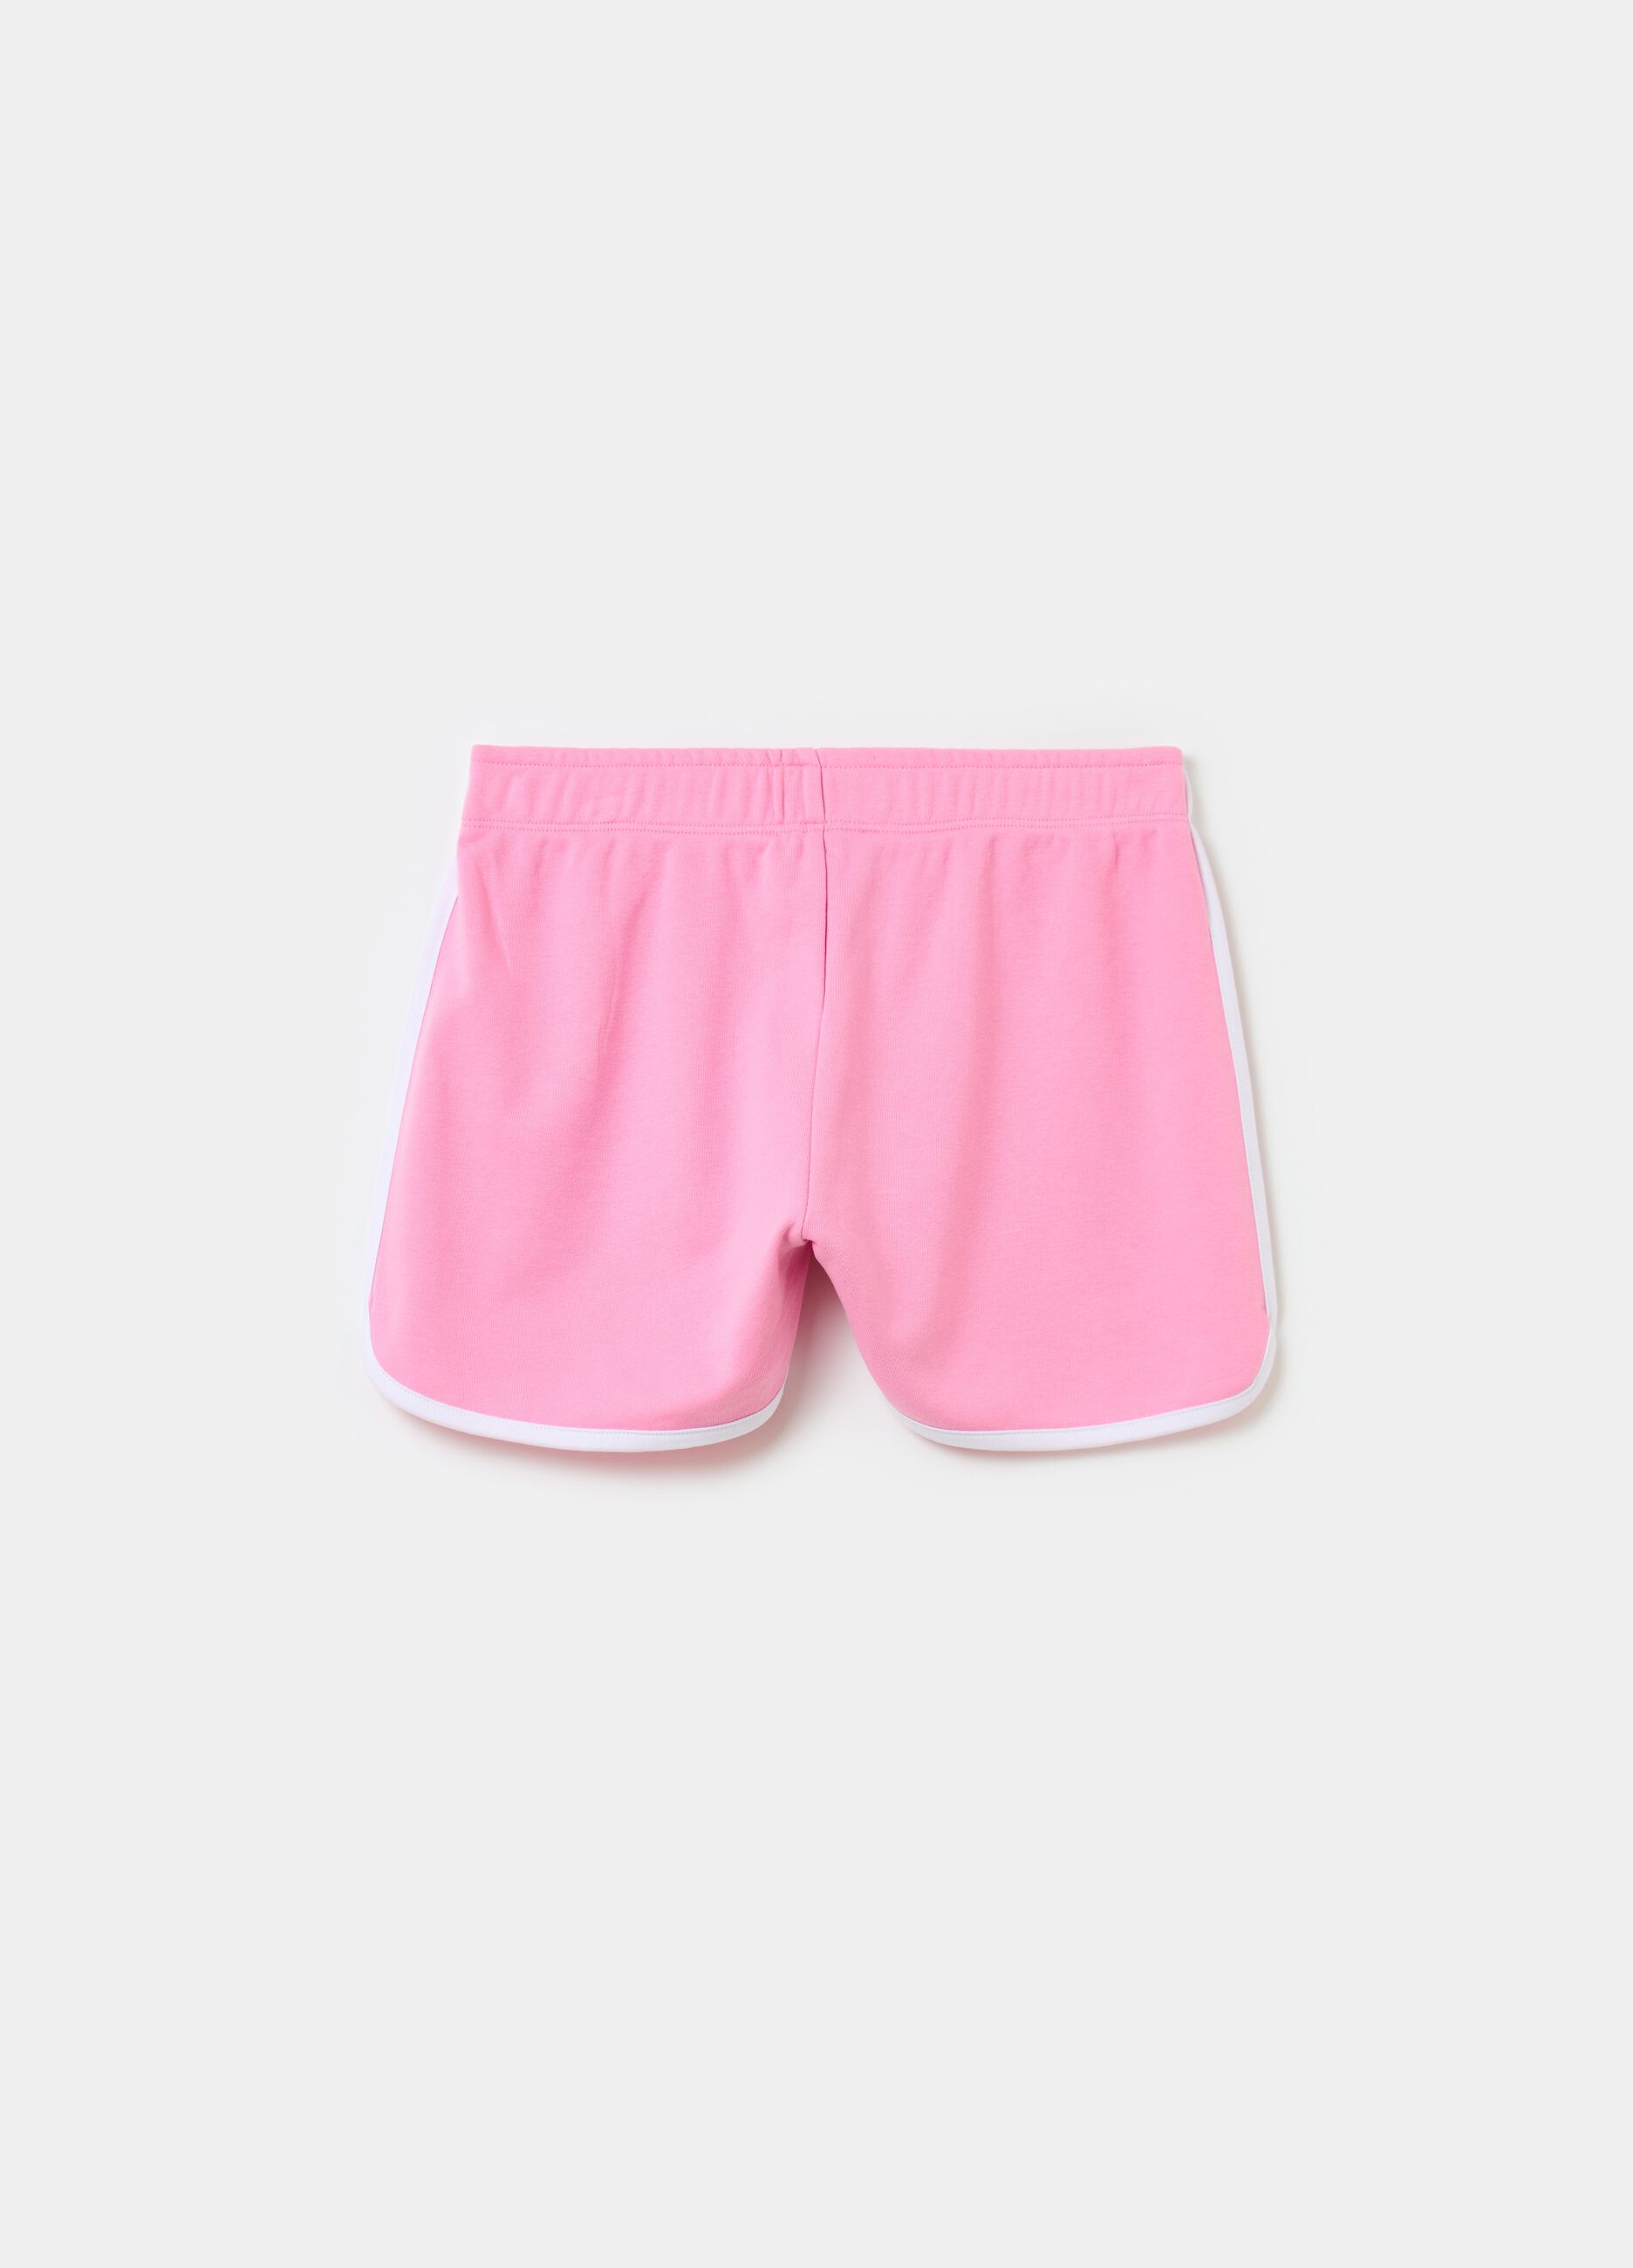 Essential shorts in French terry